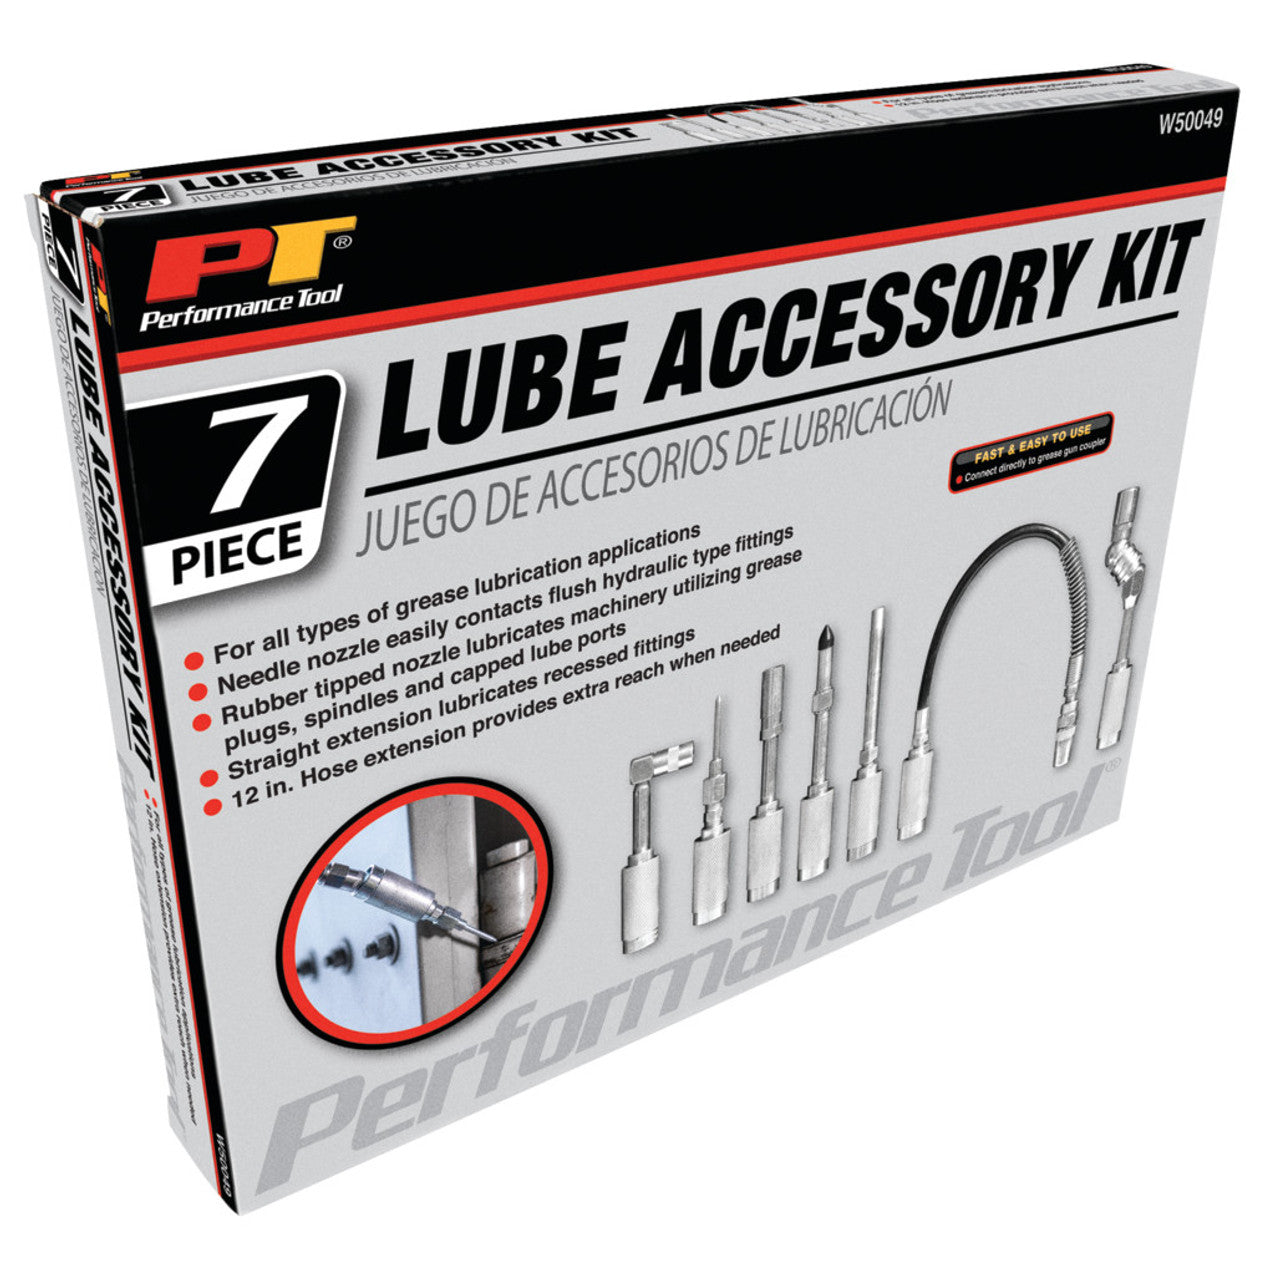 ET WILW50049 Performance Tool Grease Gun Accessory Kit (7 pc)